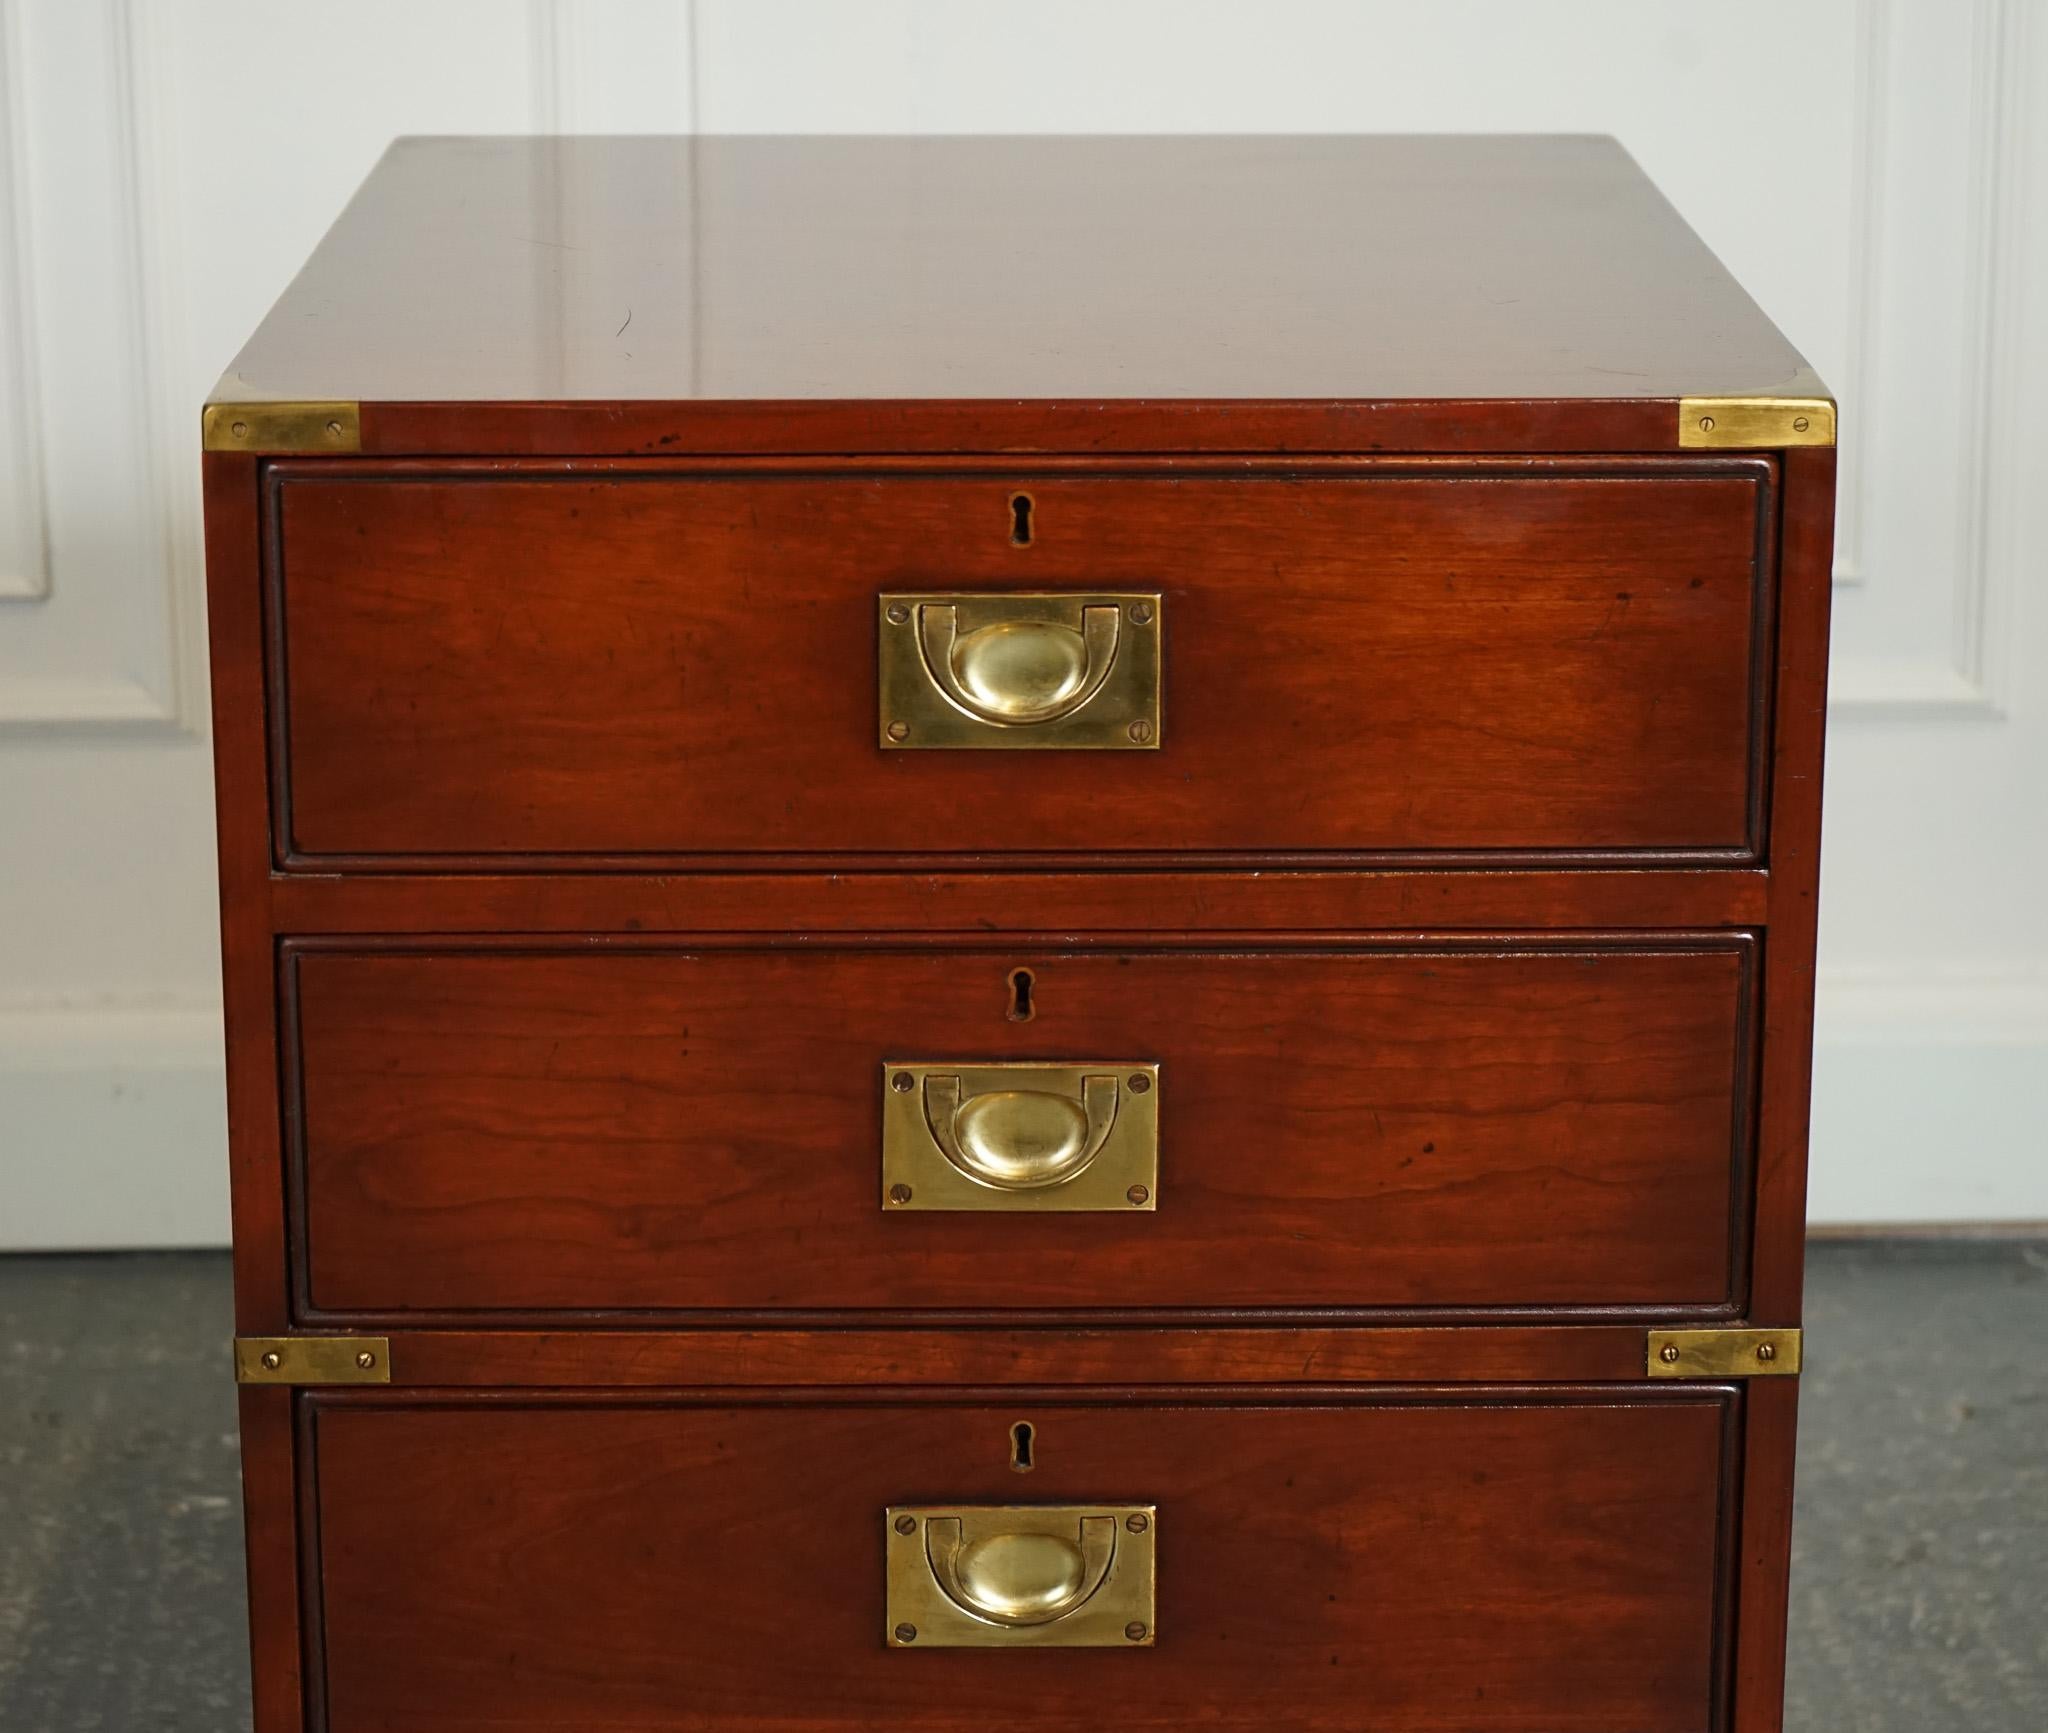 Hand-Crafted KENNEDY HARRODS MILiTARY CAMPAIGN OFFICE DRAWERS FILLING CABINET J1 (2/2)